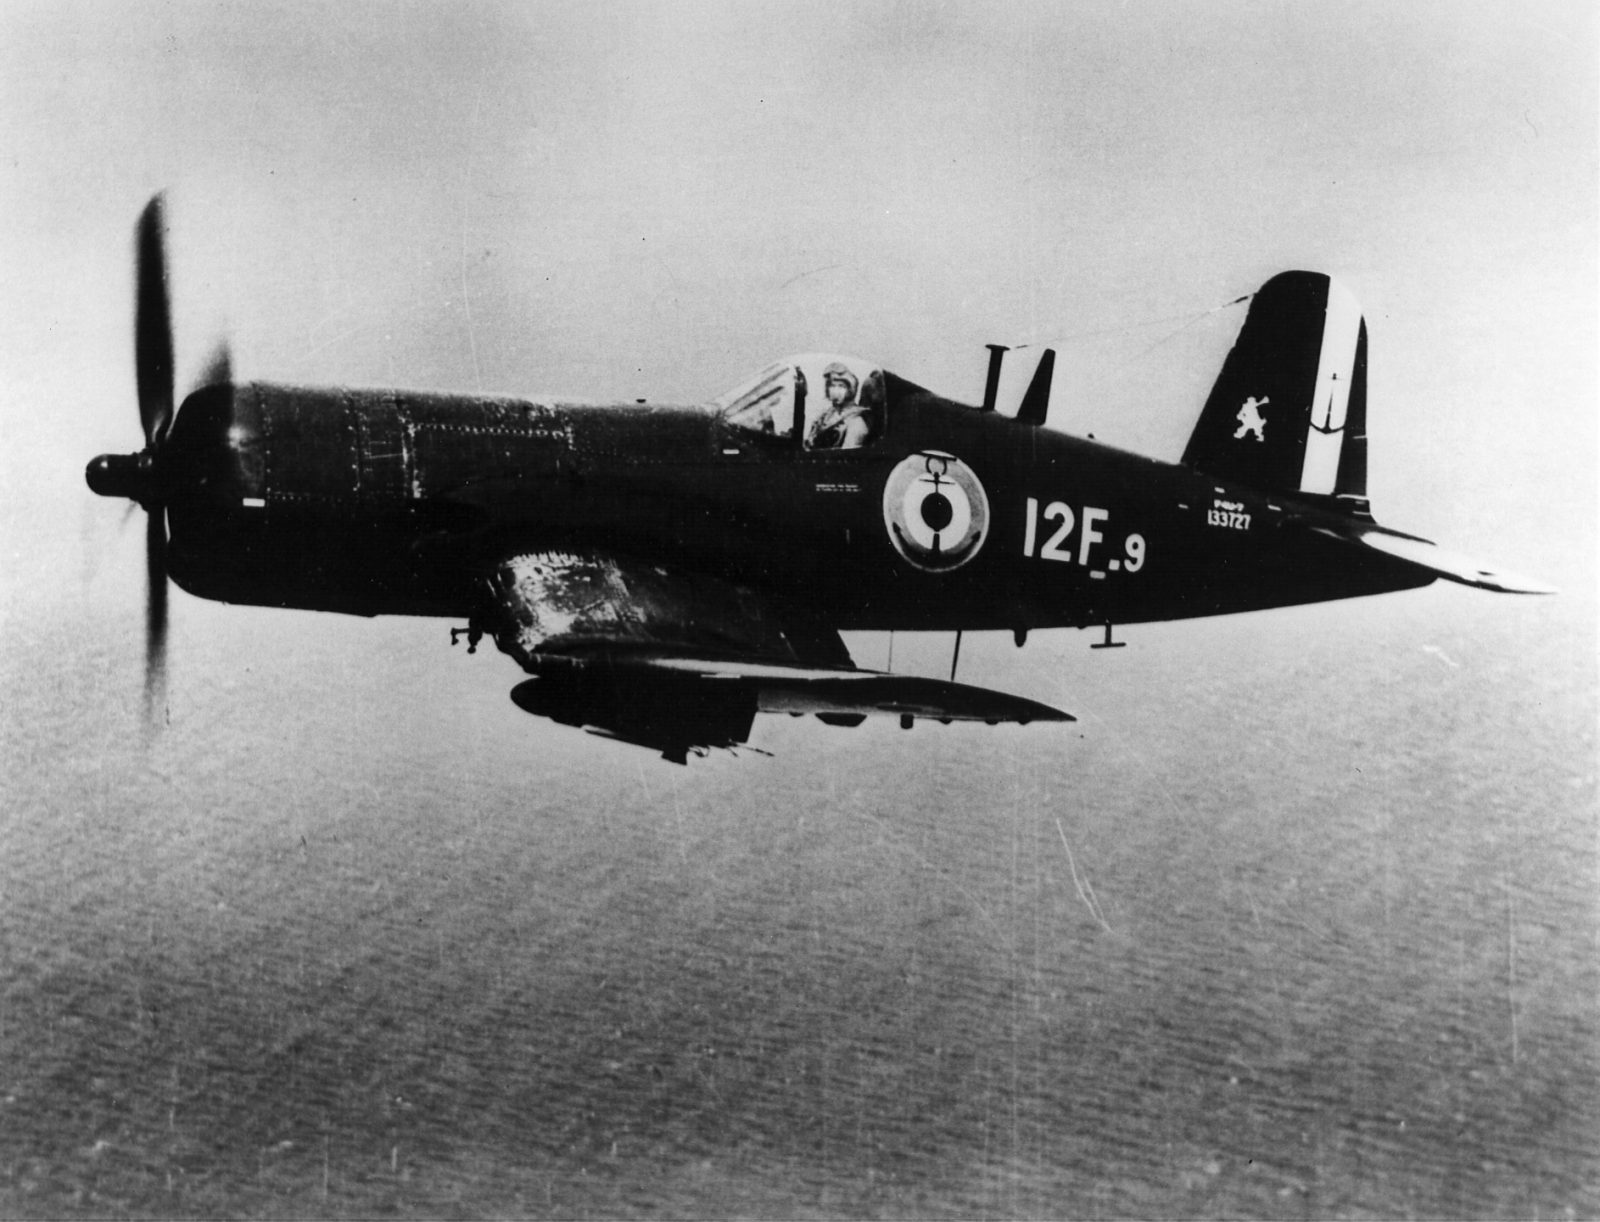 Vought F4U Corsair: The US Navy's Equal of Japanese Mitsubishi A6M Zero